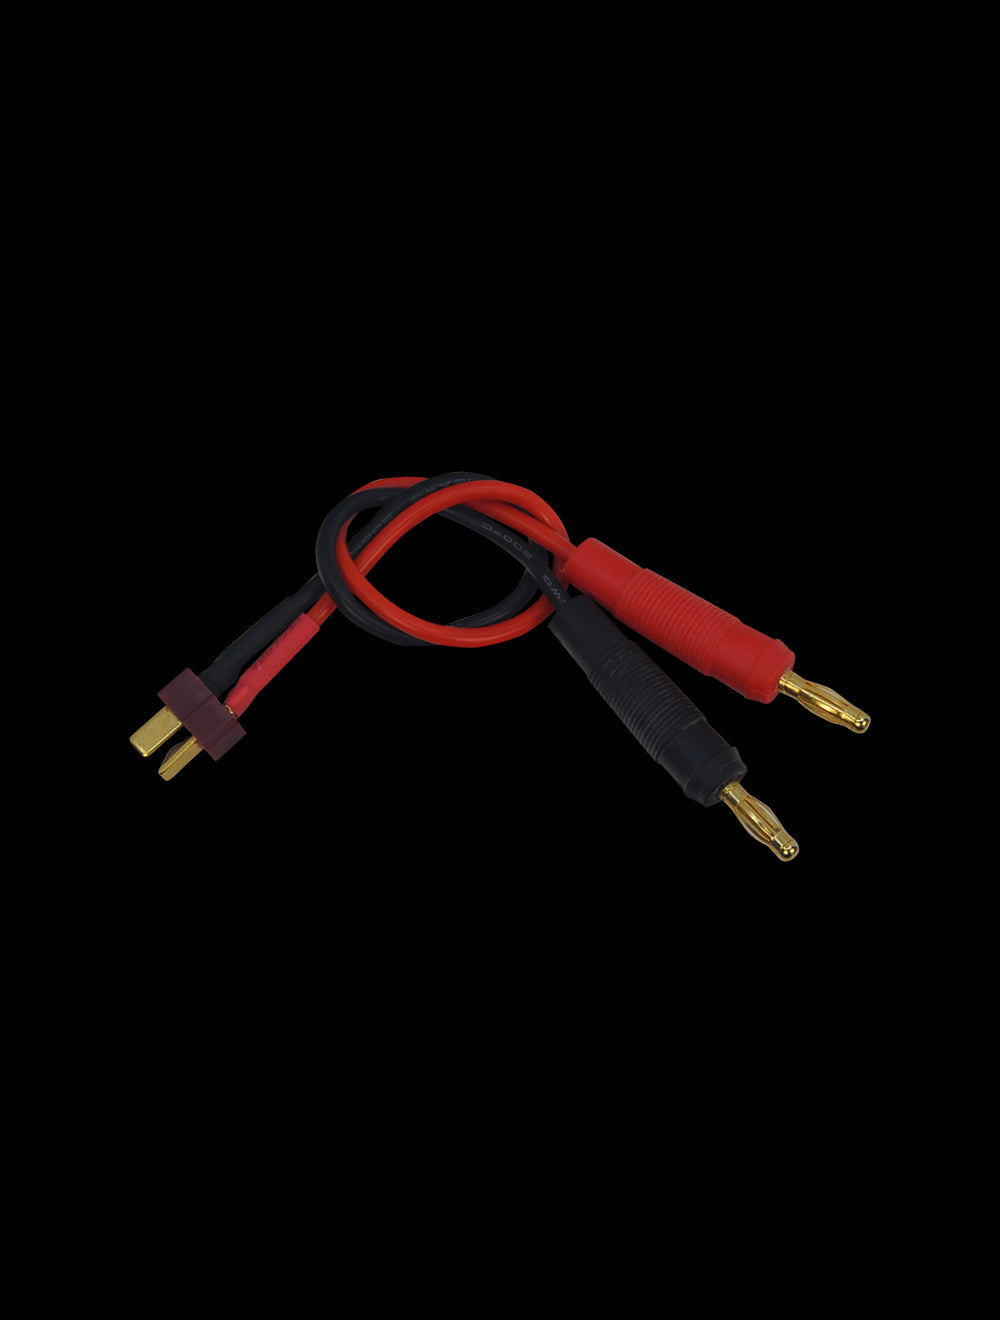 Overlander Deans to 4mm Gold Connectors Charge Lead 2638